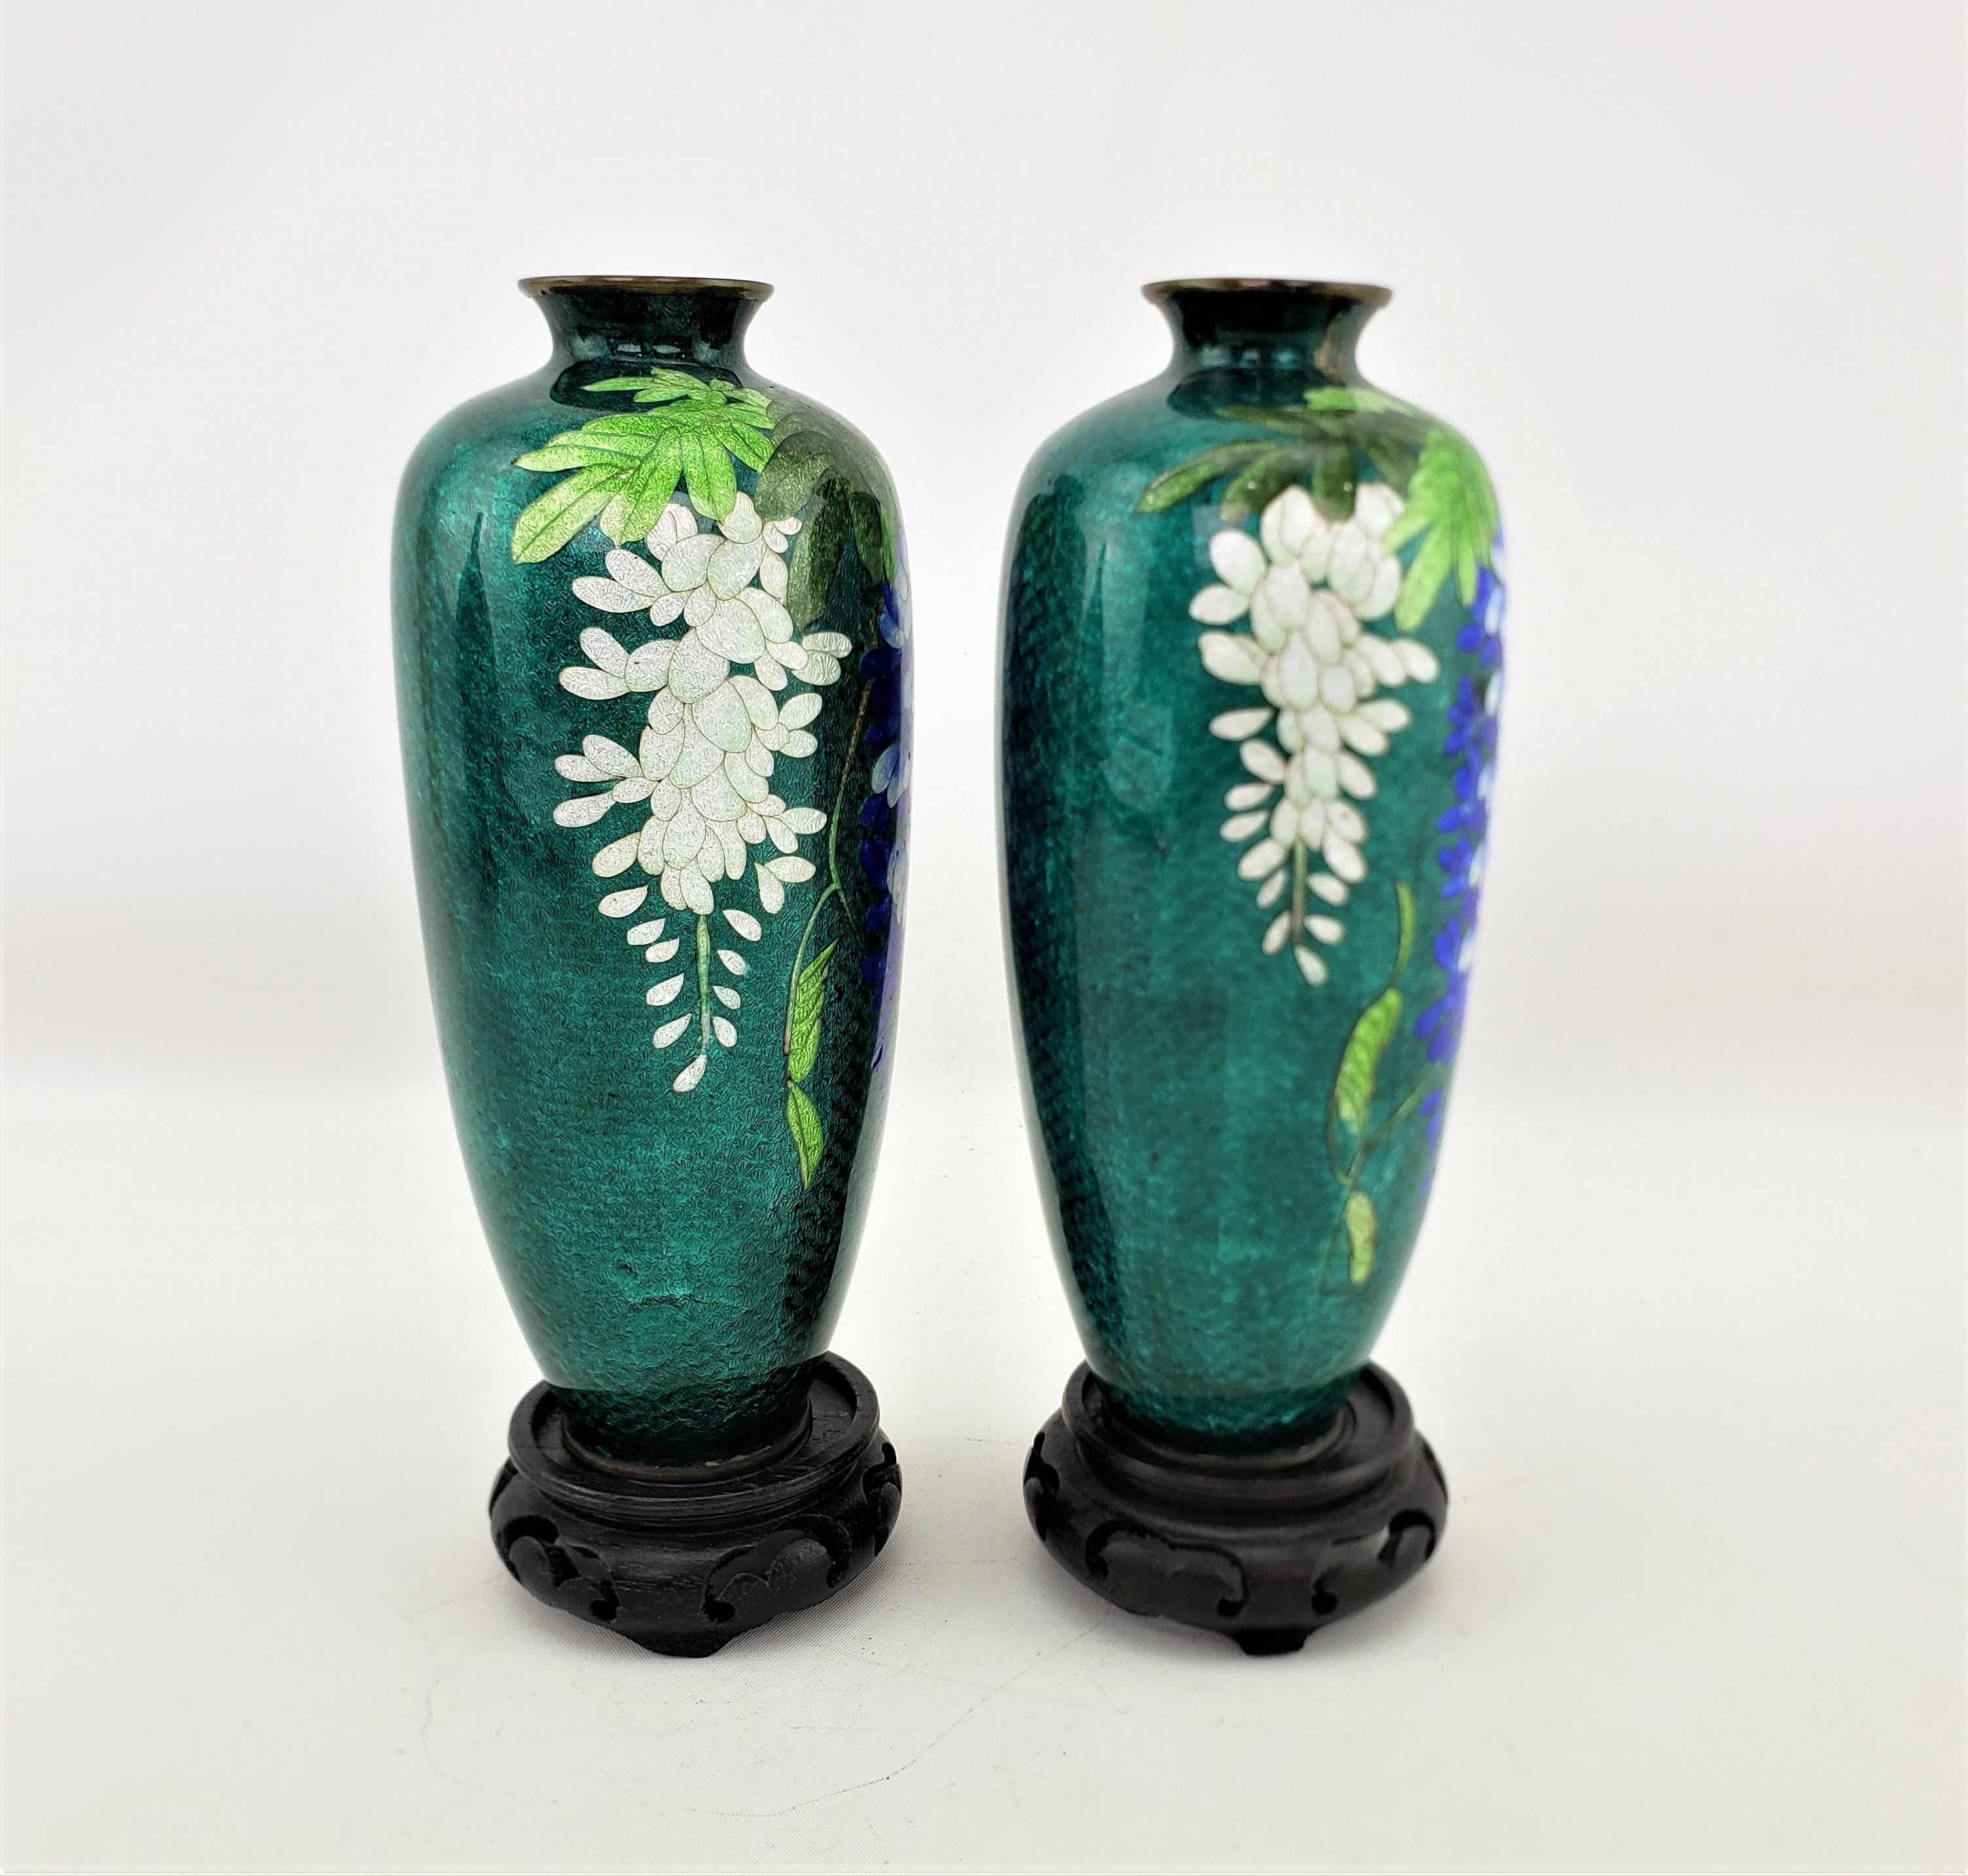 Brass Pair of Antique Japanese Cloisonne Vases with Floral Decoration & Wooden Stands For Sale